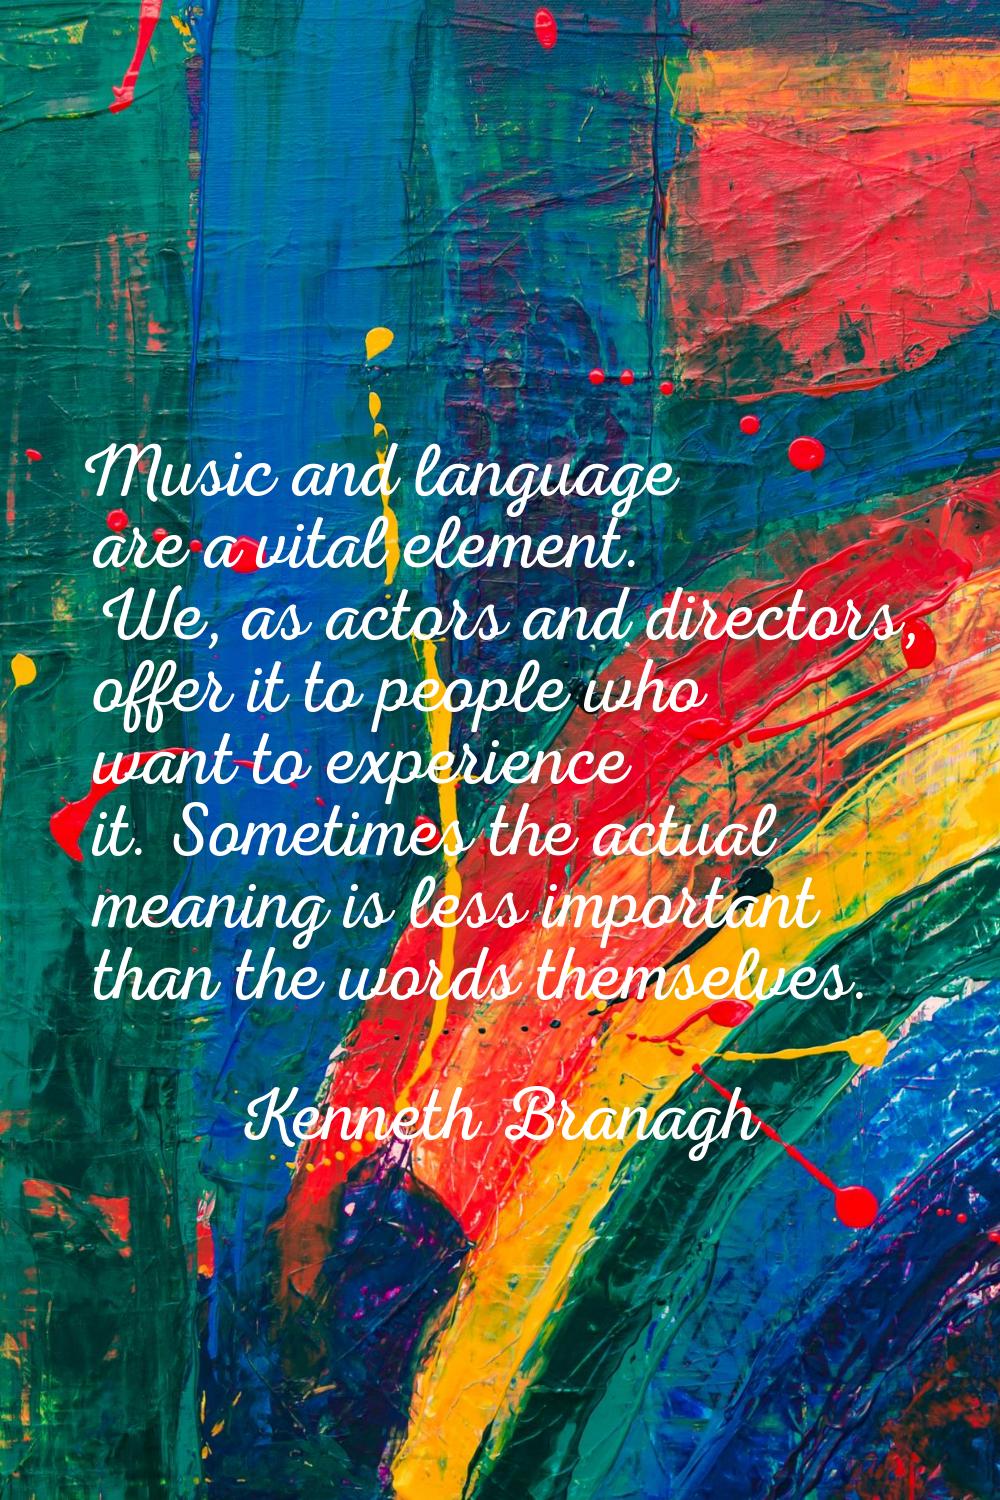 Music and language are a vital element. We, as actors and directors, offer it to people who want to